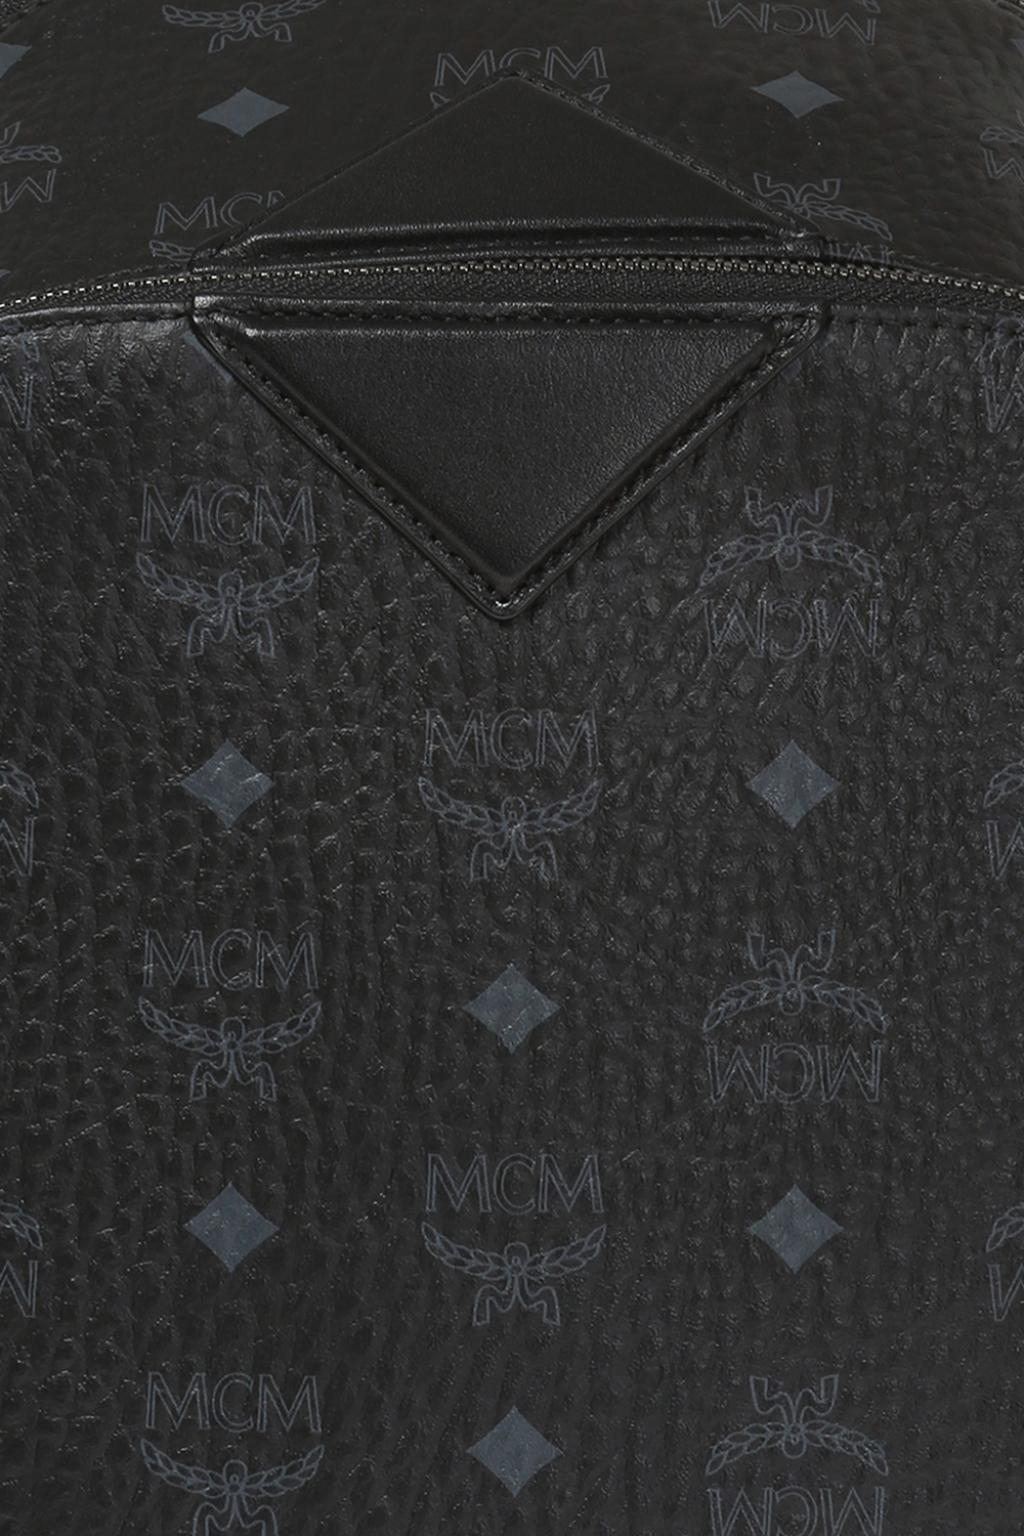 Authentic MCM Monogram Embossed Black Leather Small Backpack